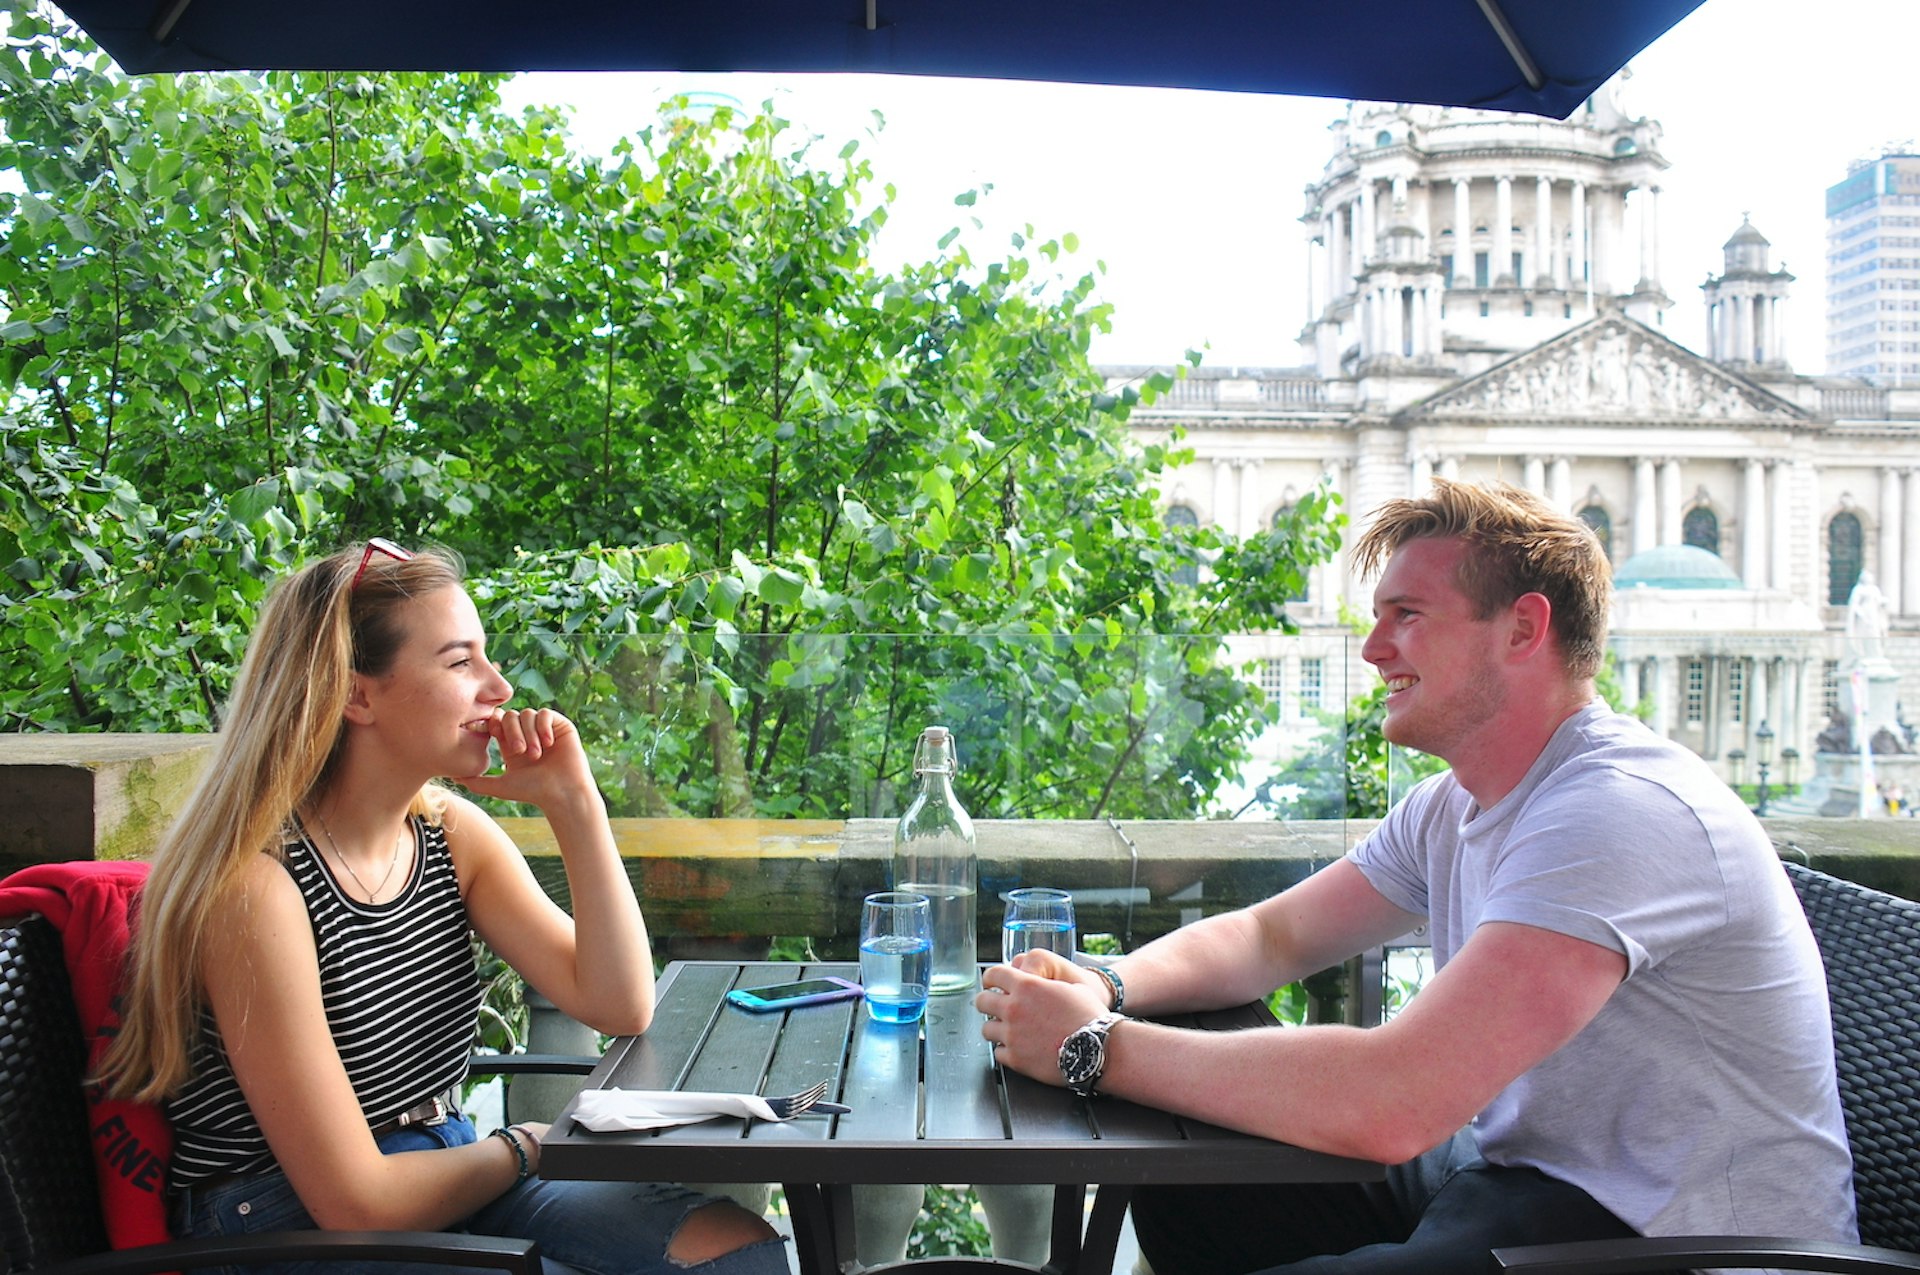 A young couple enjoys a meal at an outdoor table in front of City Hall, Belfast, Northern Ireland, United Kingdom